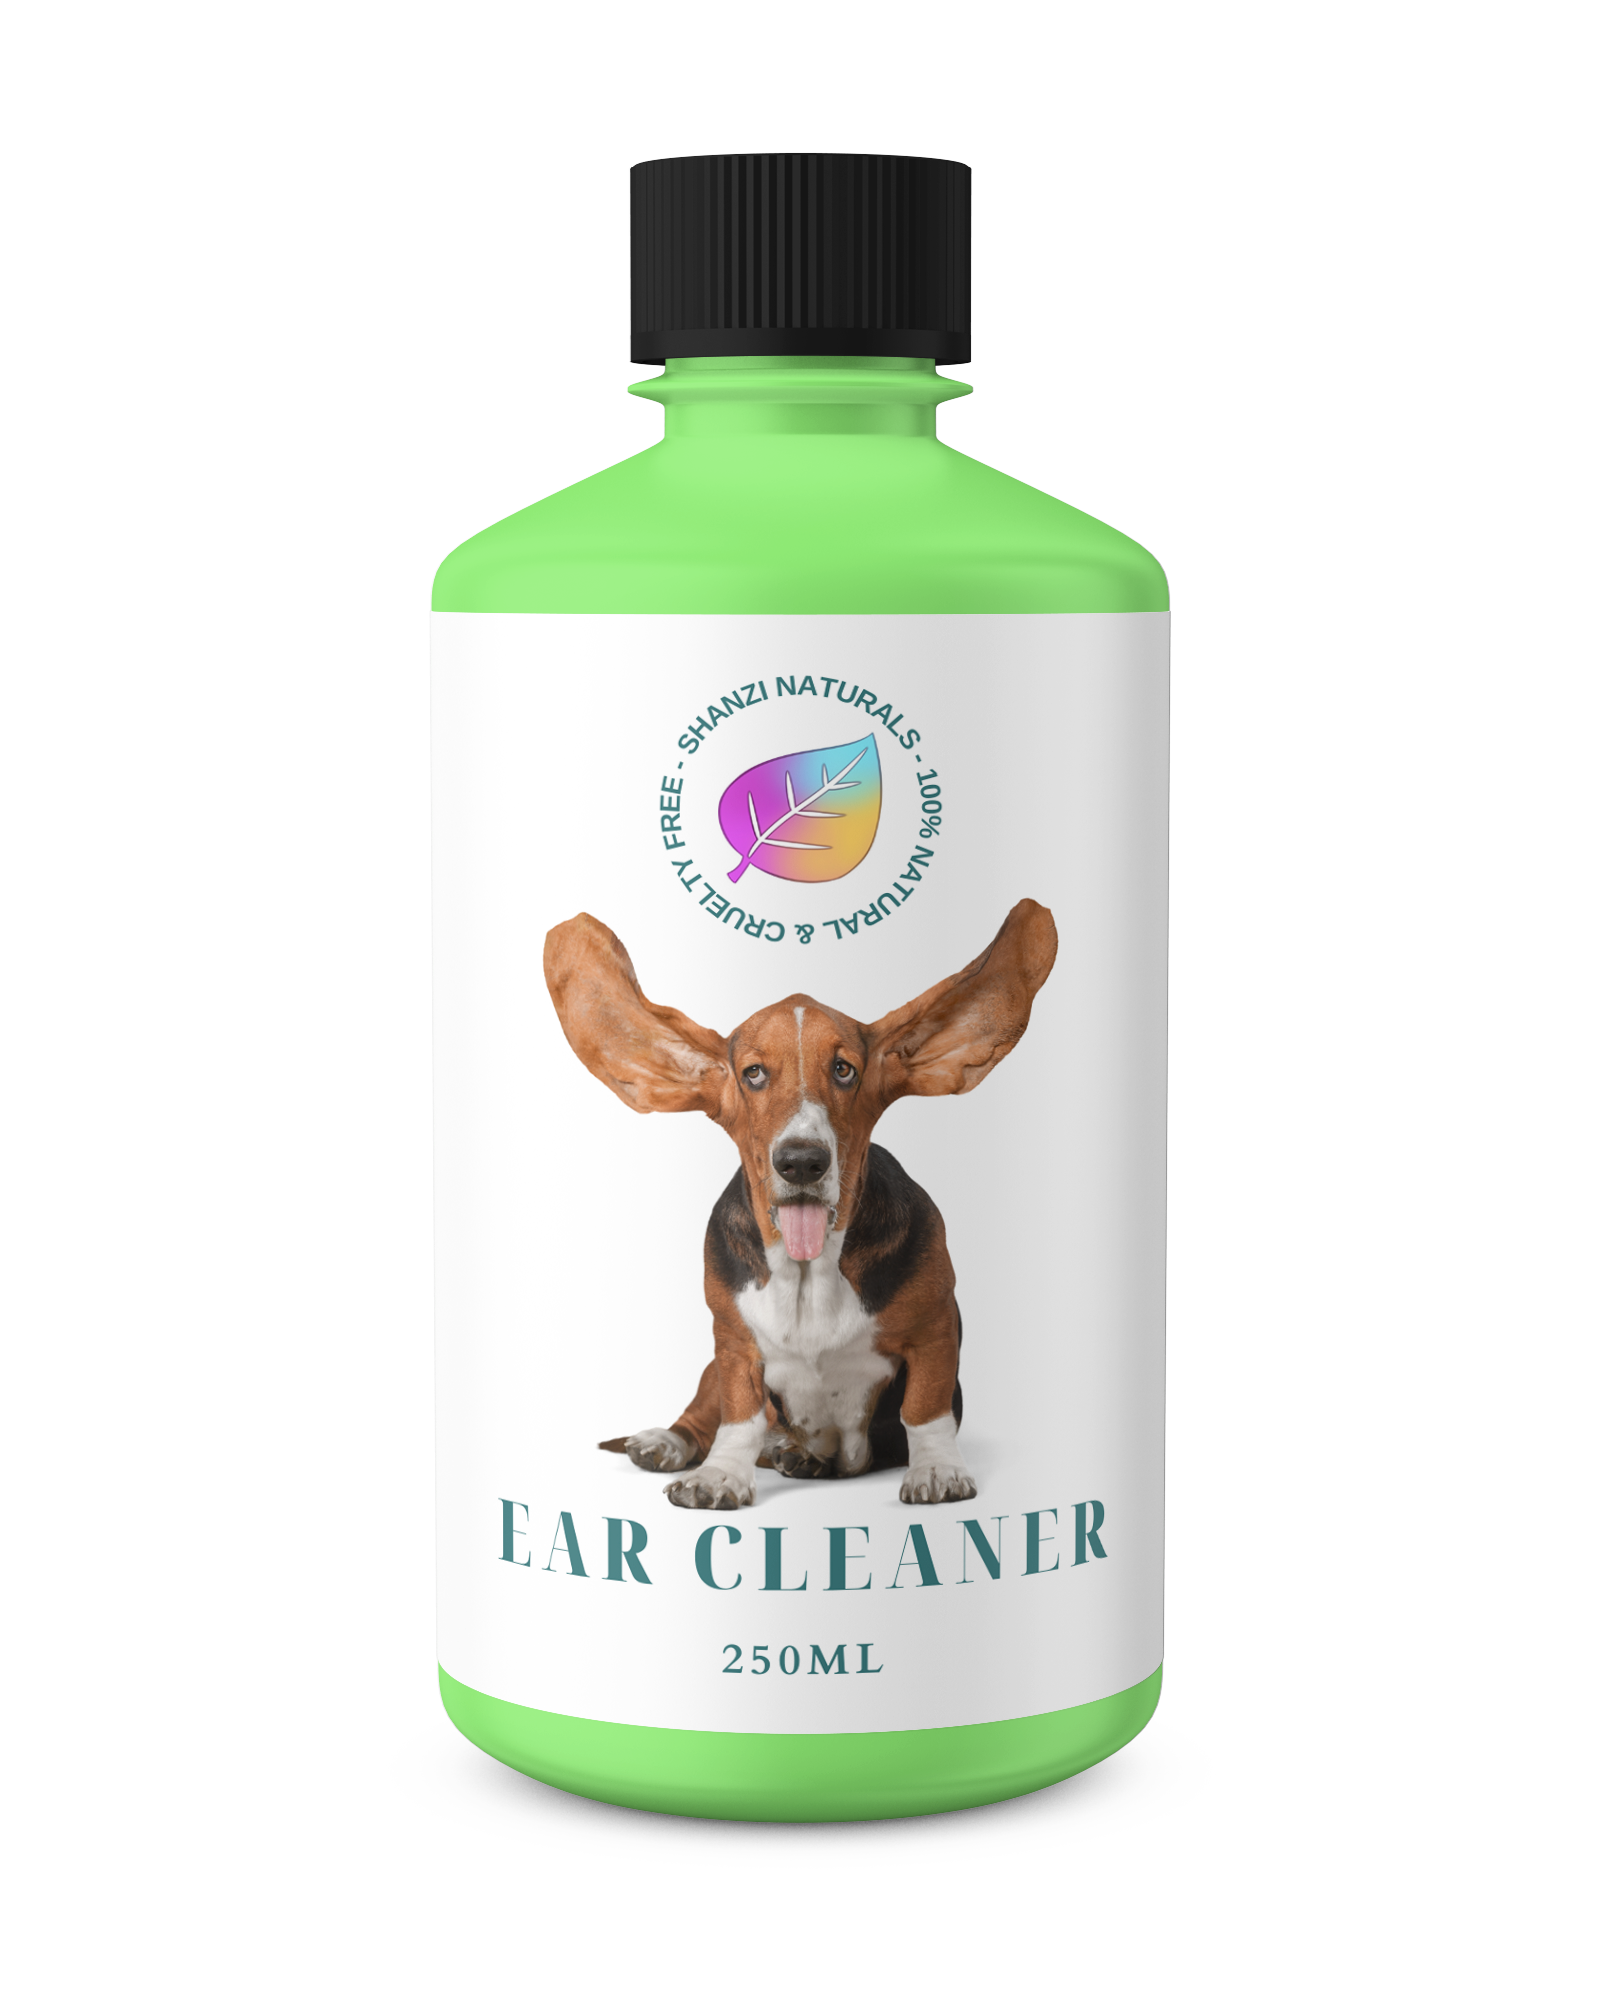 ear cleaner for dogs and cats made from 100% natural ingredients. Large bottle ideal fro groomers.